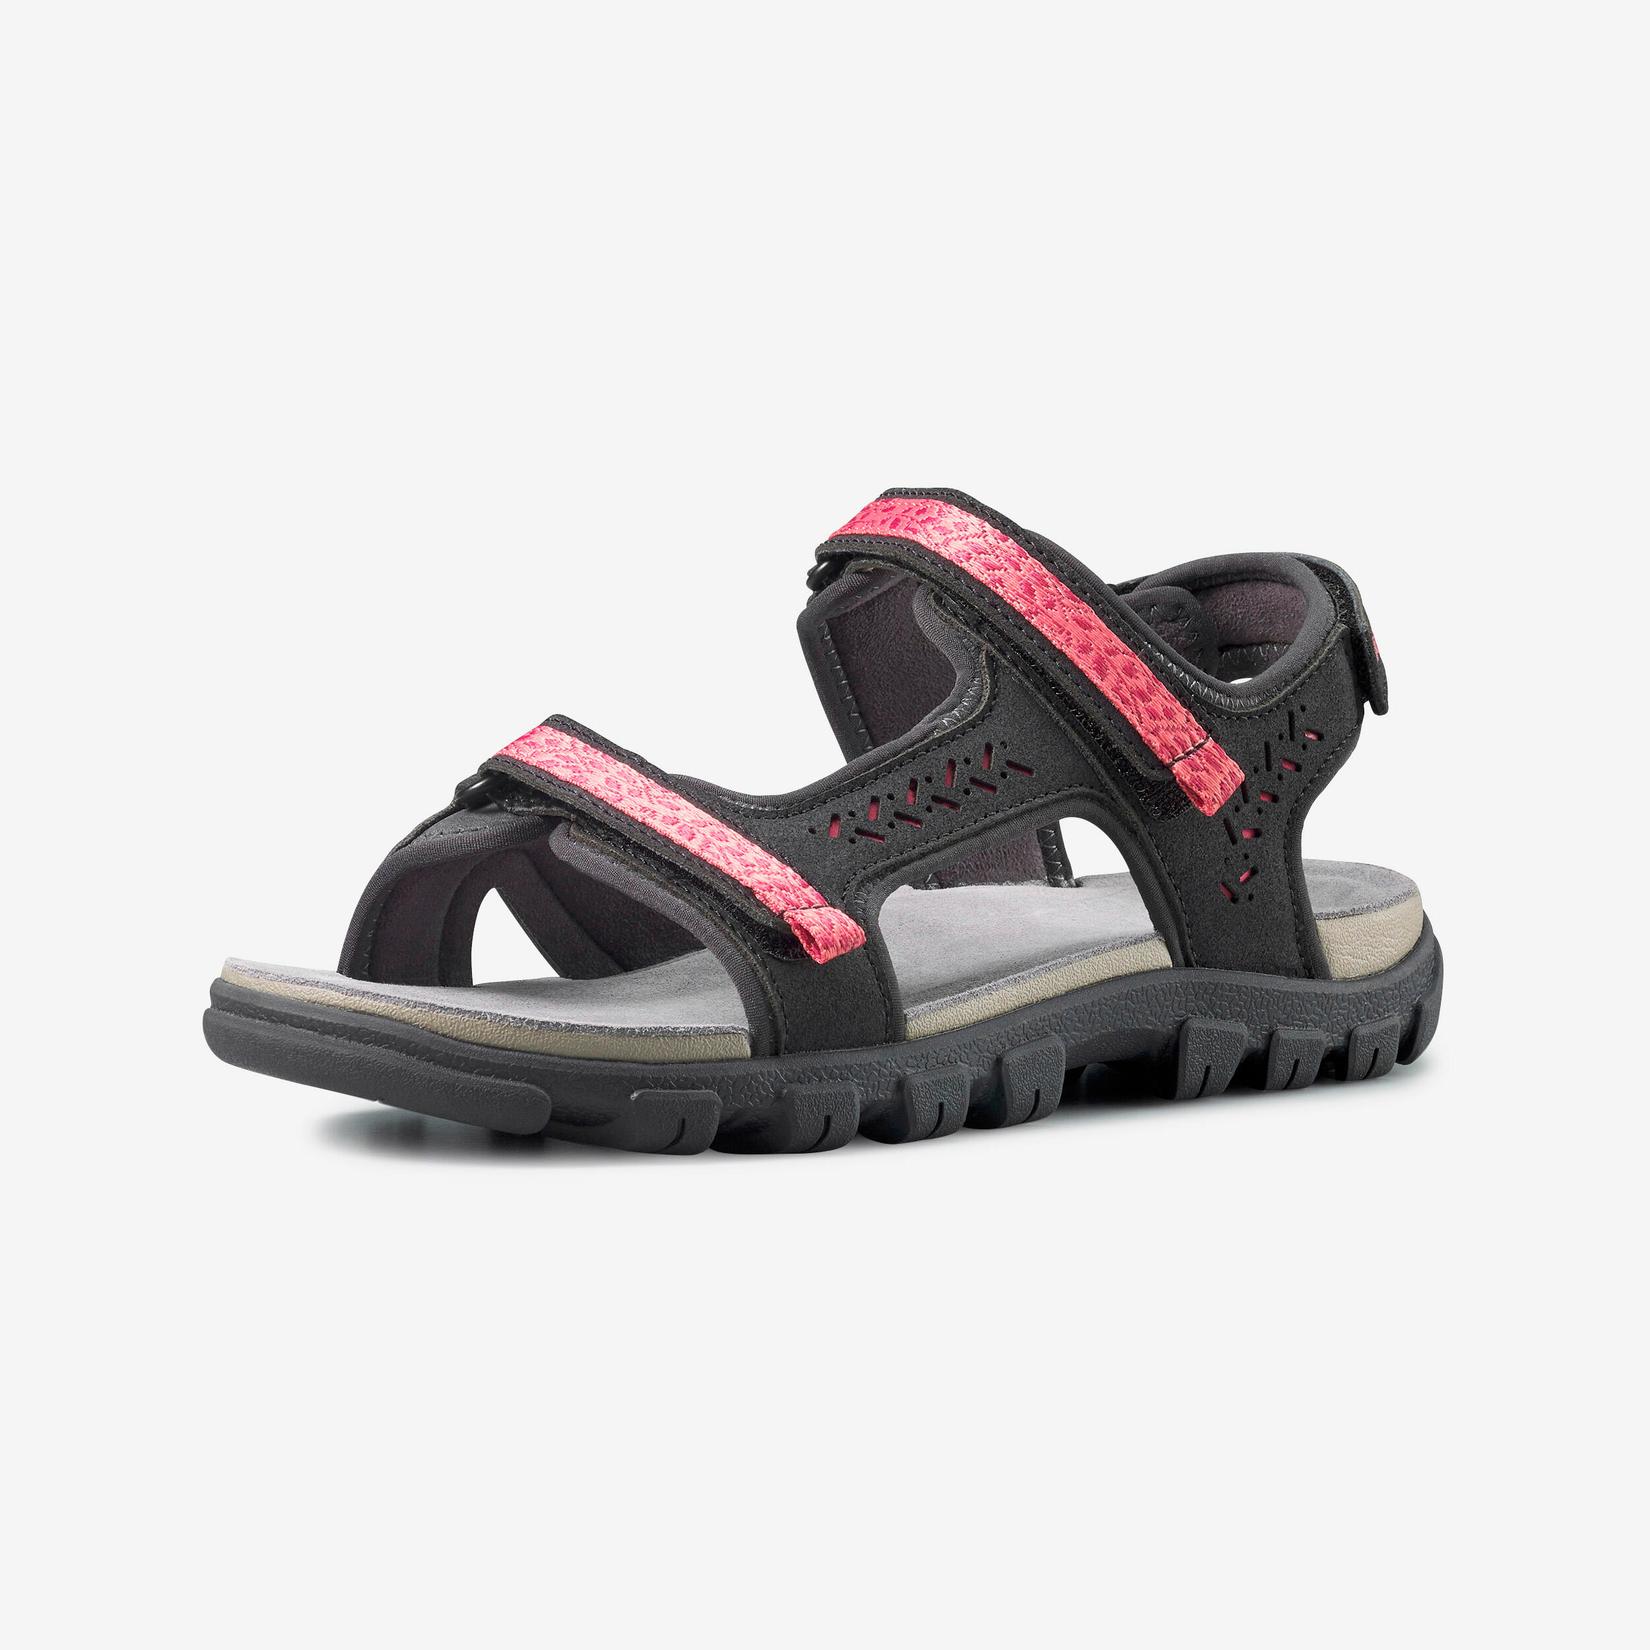 Women's Nature Hiking Sandals NH500 - Grey/Pink offers at S$ 44.9 in Decathlon